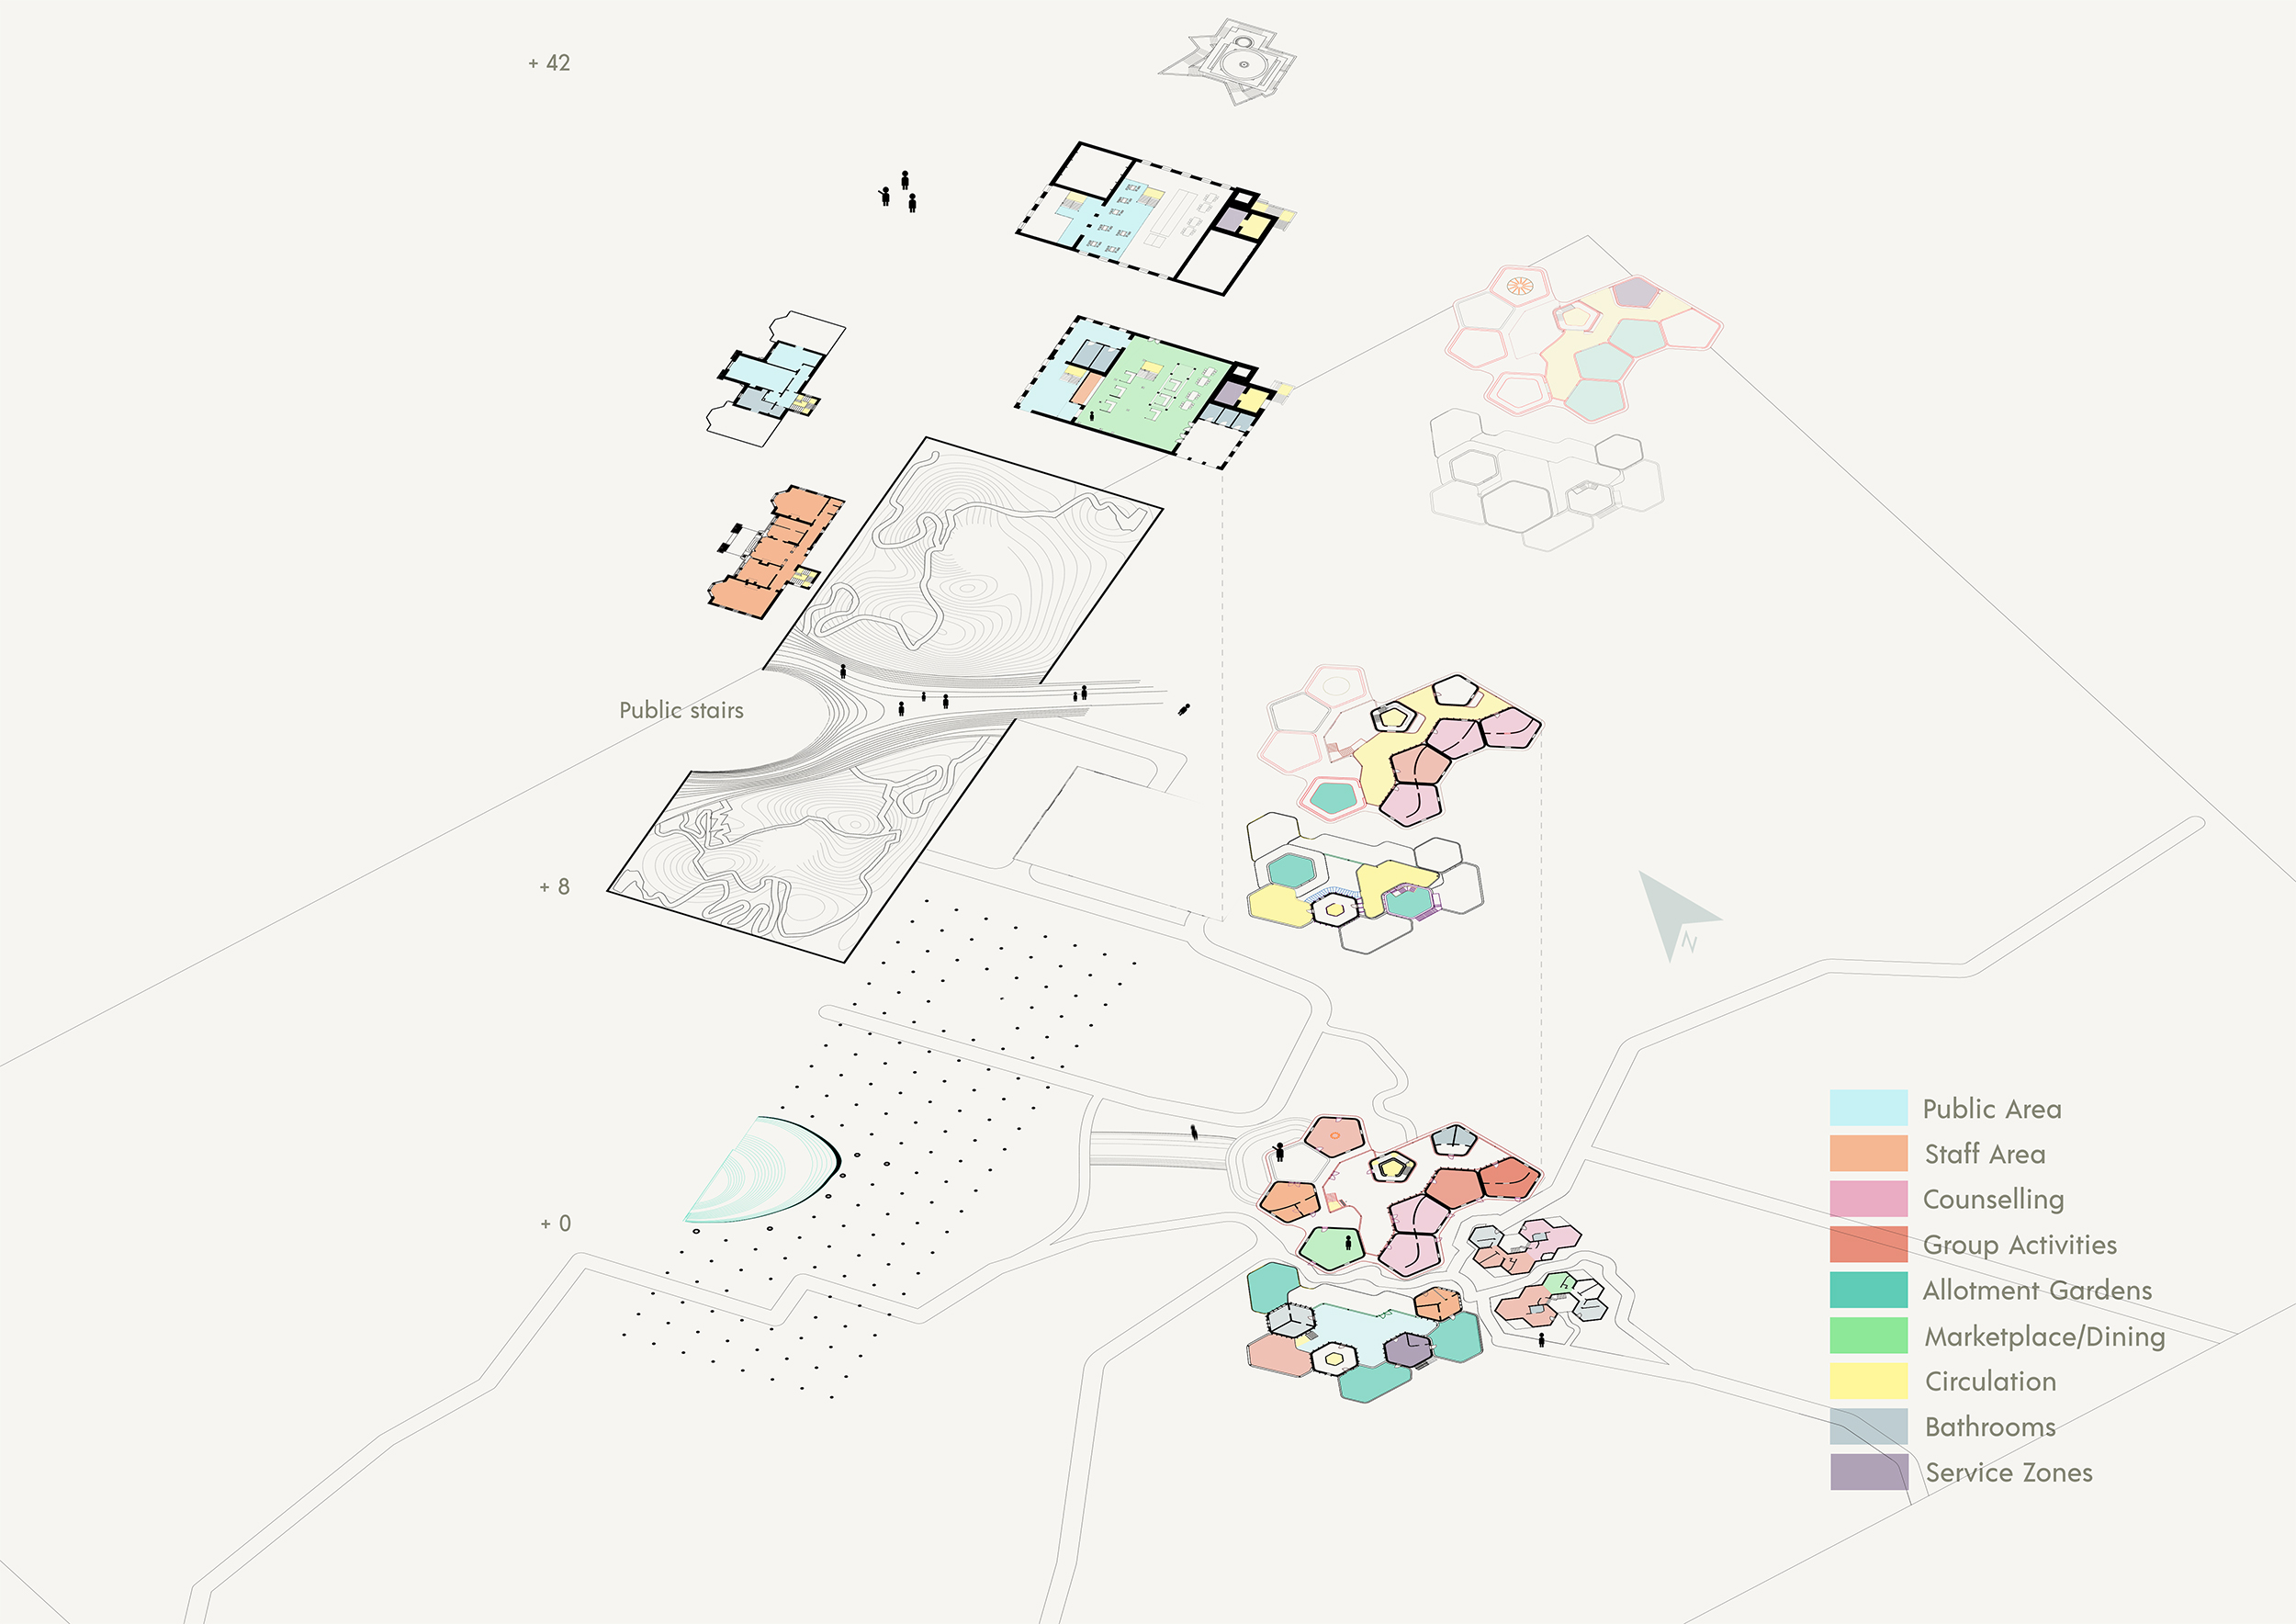 Portfolio Page of an exploded axonometric differentiating between the public areas, staff areas, counselling, group activities, allotment gardens, marketplace, circulation, bathrooms and service zones.